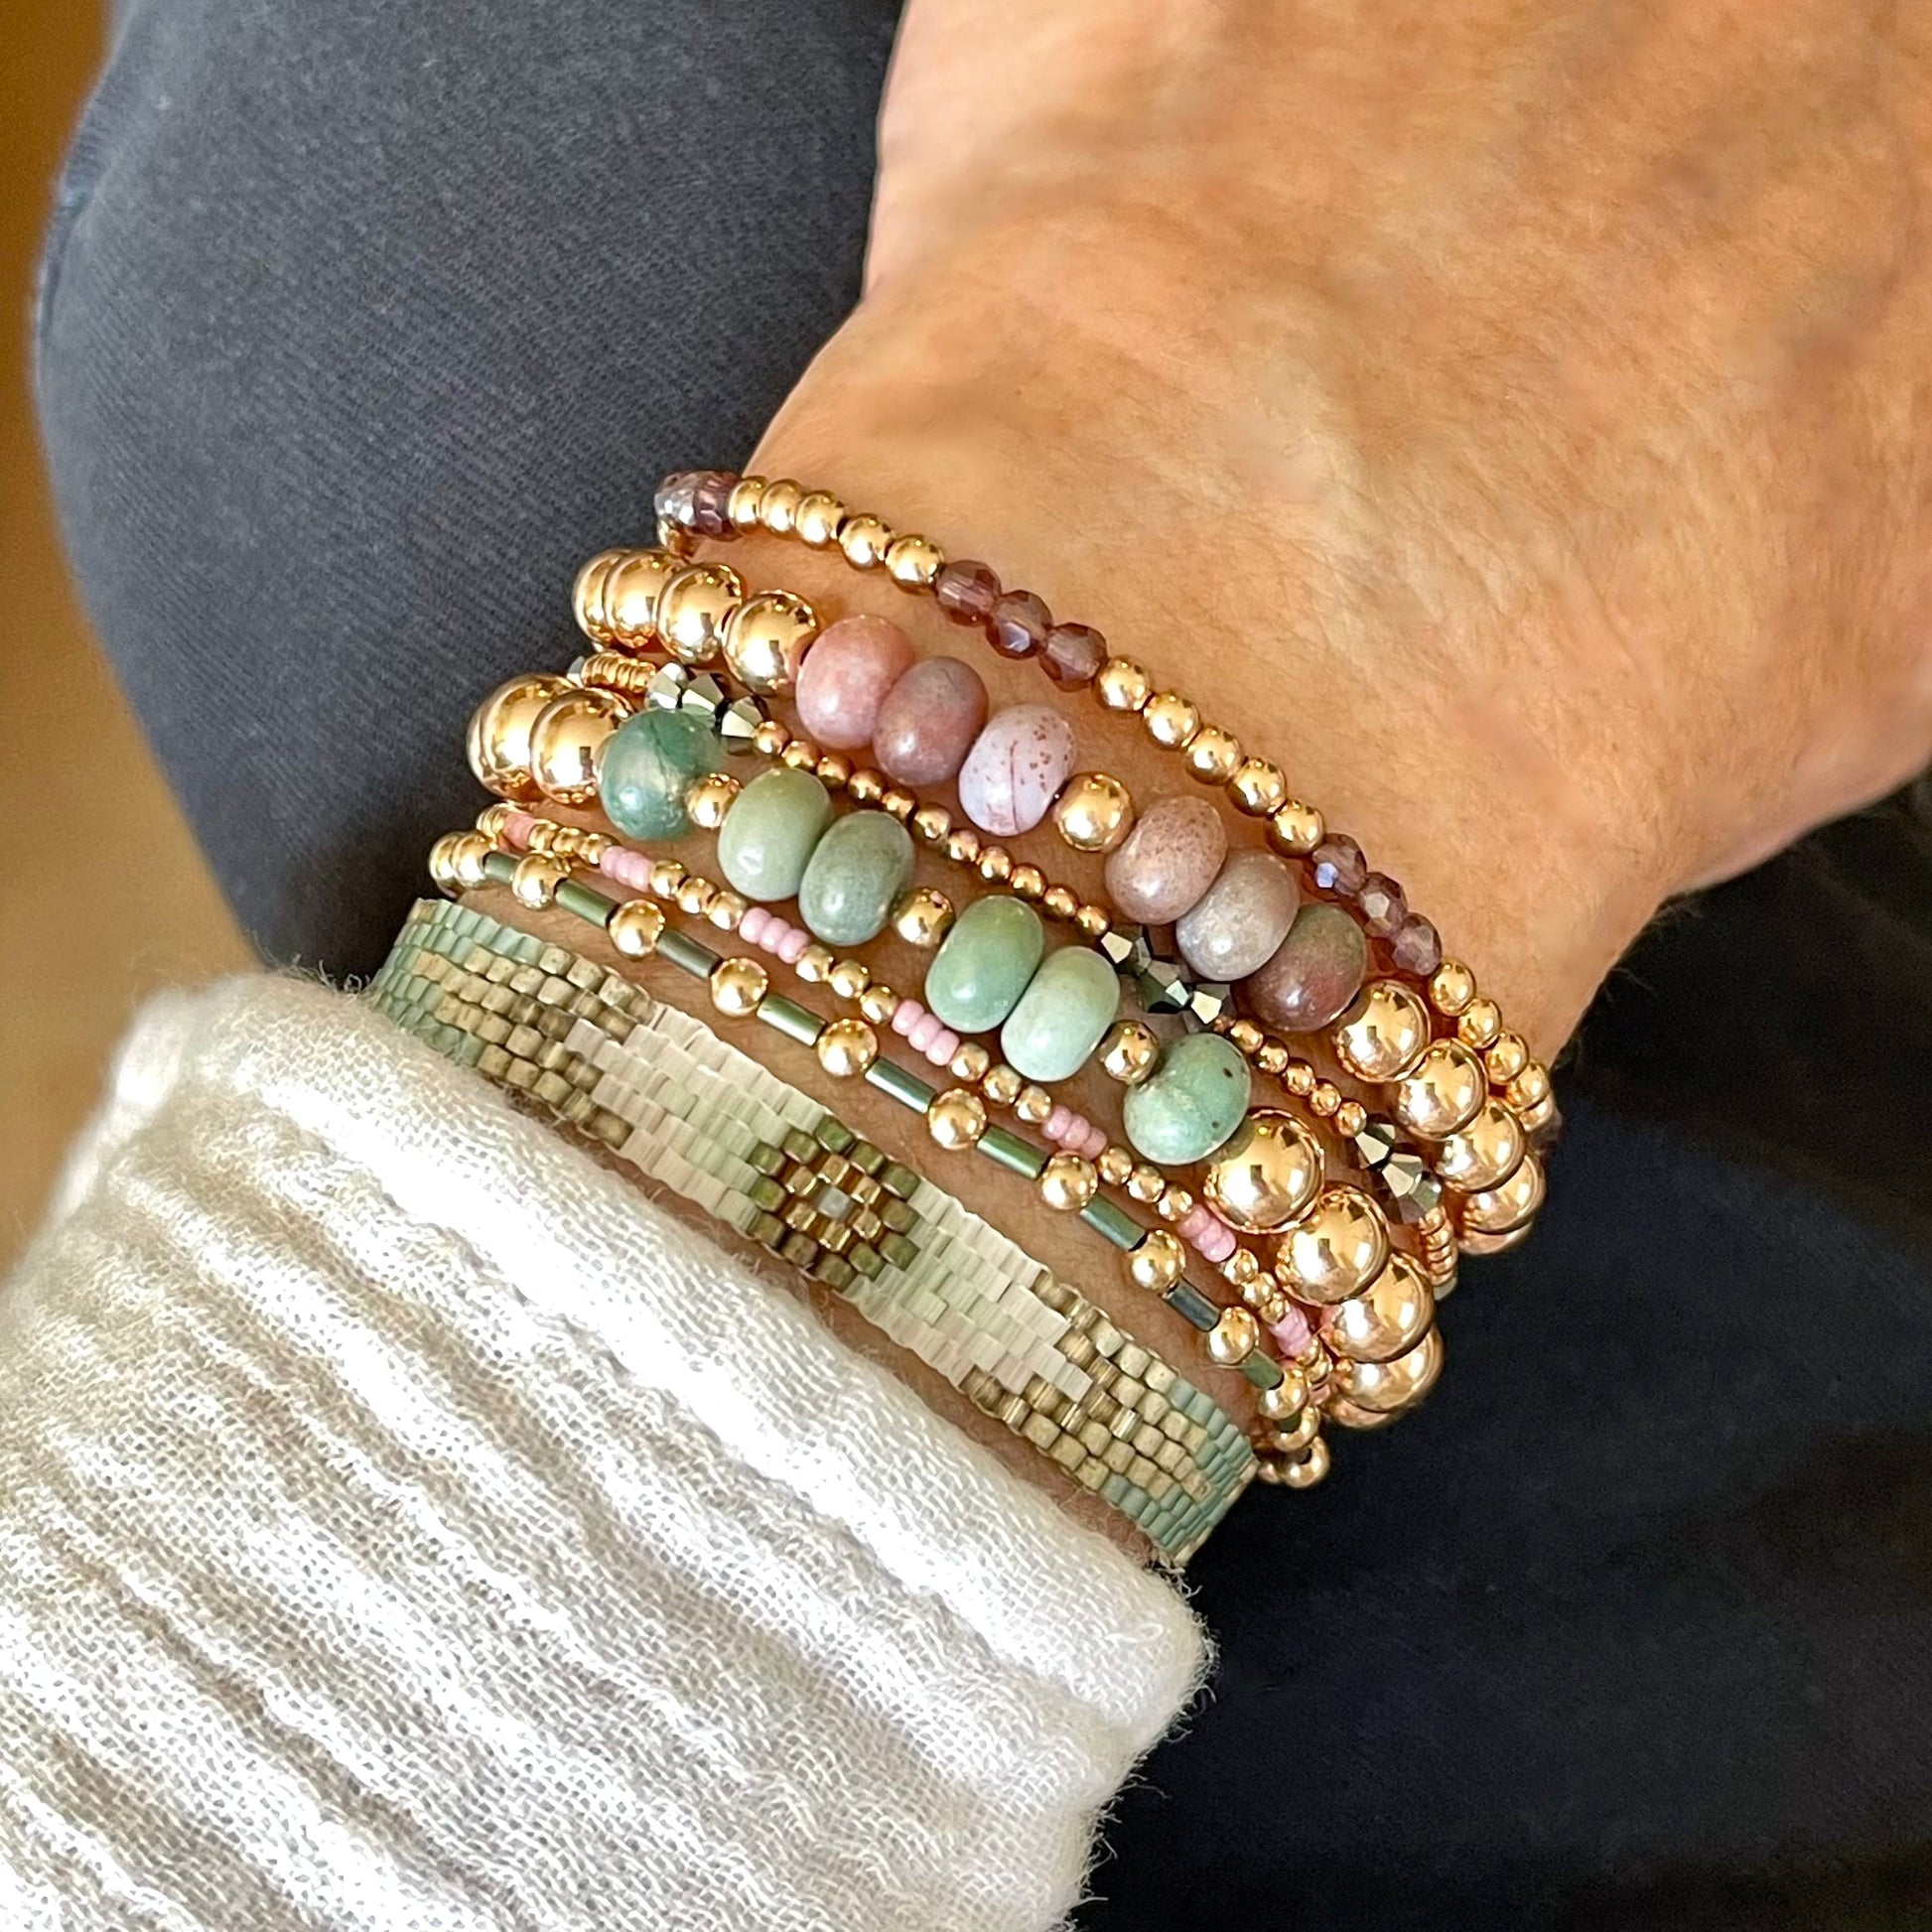 Purple and green jasper with rose gold beads stack of 7 stretch and woven beaded bracelets.